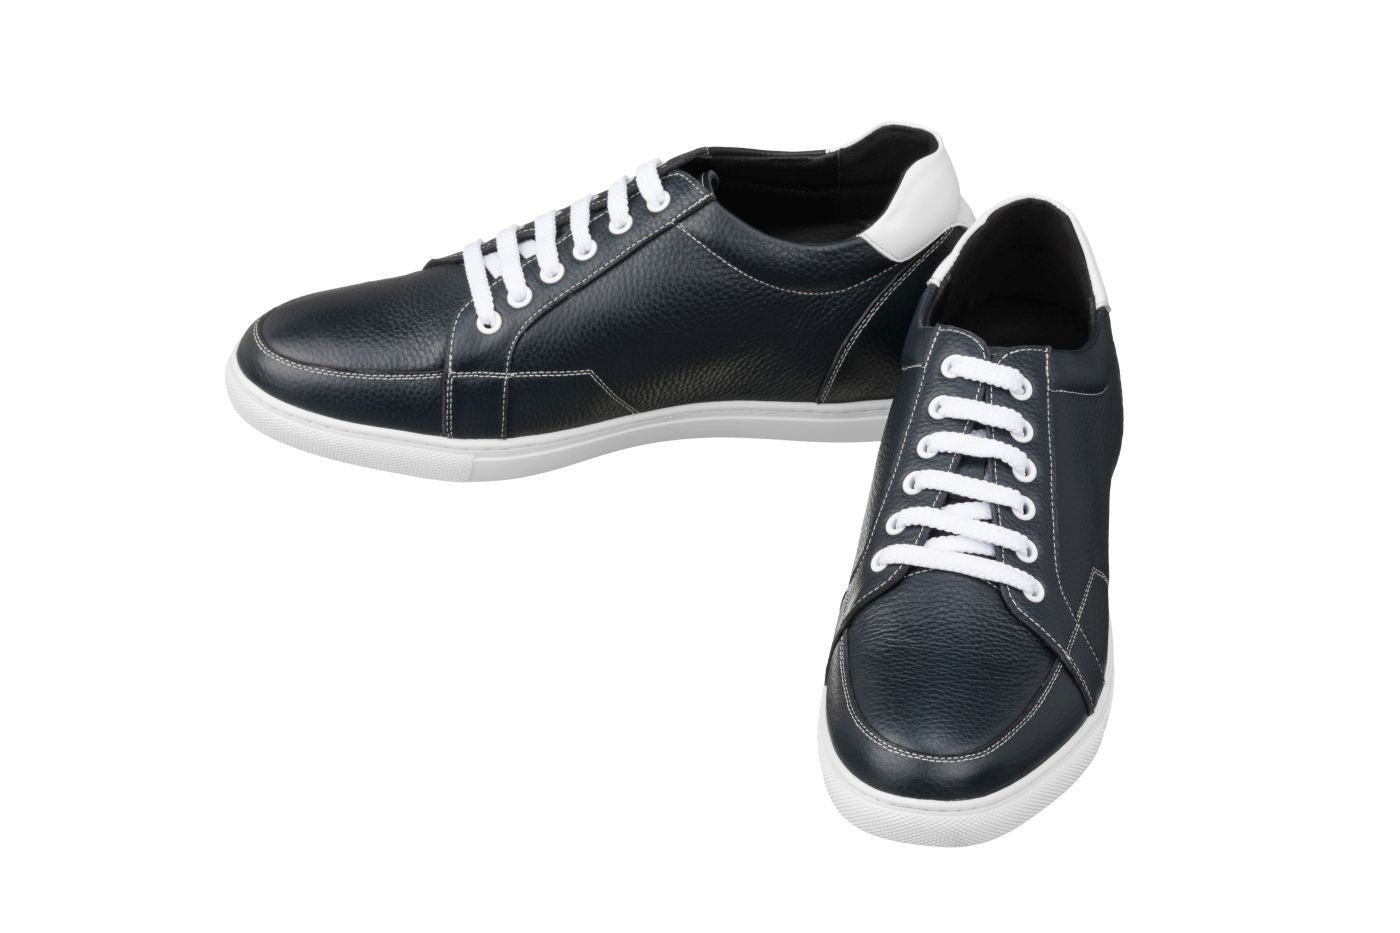 Elevator shoes height increase CALTO - K0082 - 2.5 Inches Taller (Dark Blue/White)